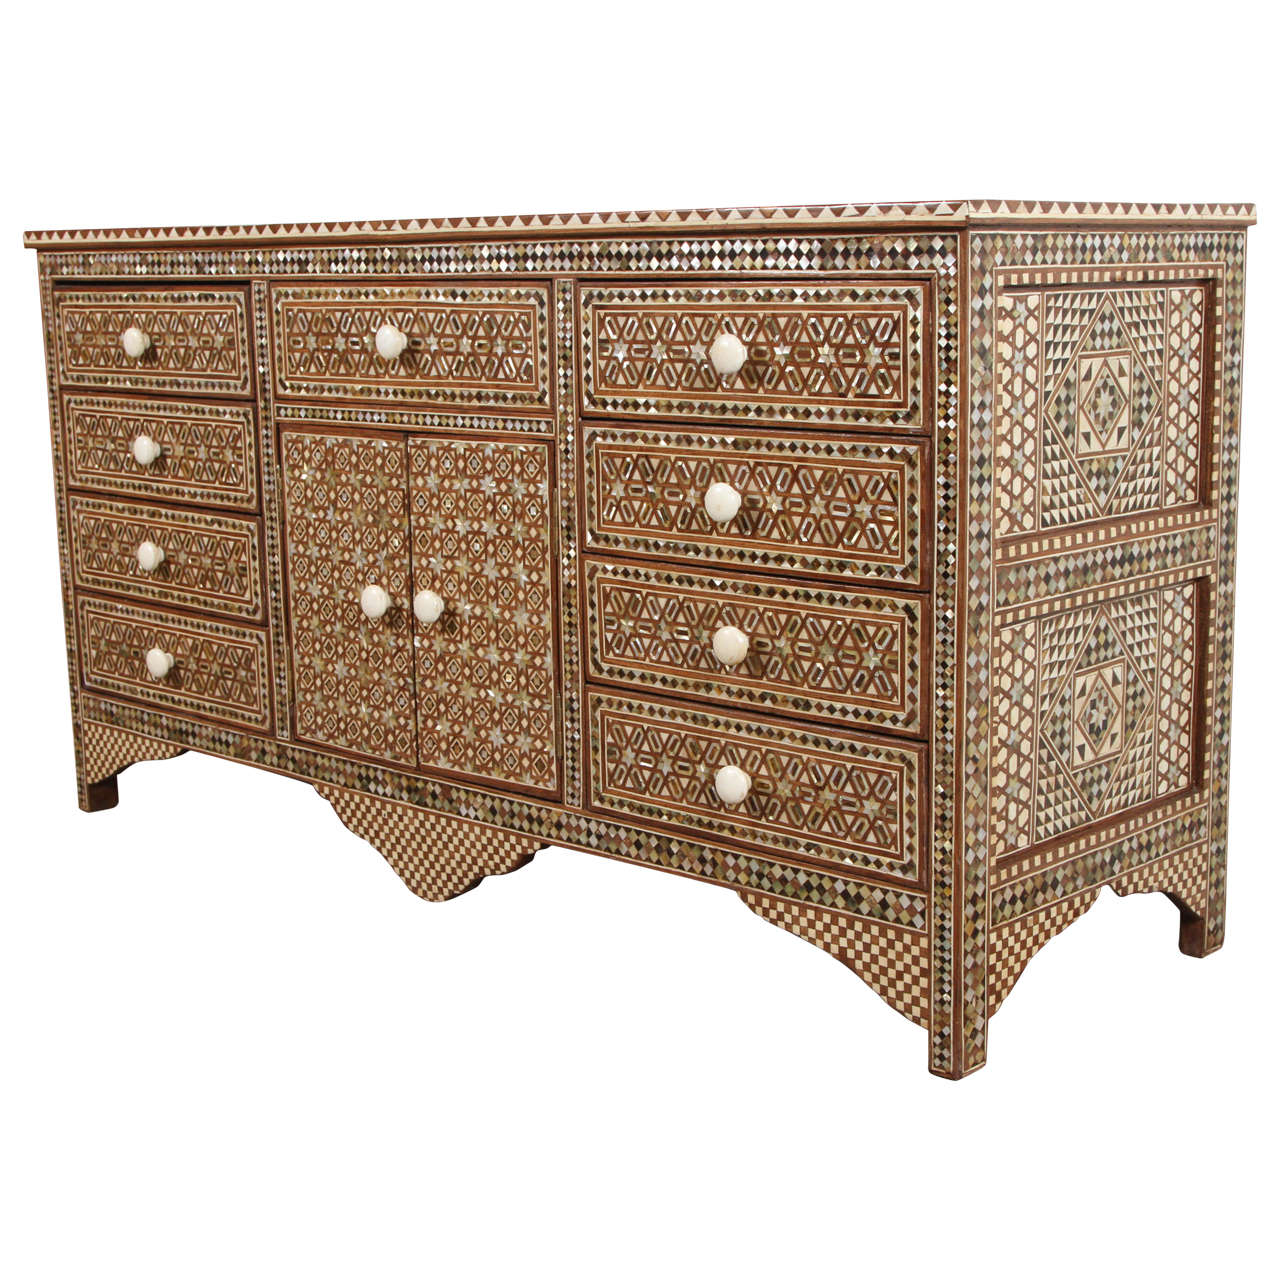 Syrian Mother-of-Pearl and Tortoise Sideboard